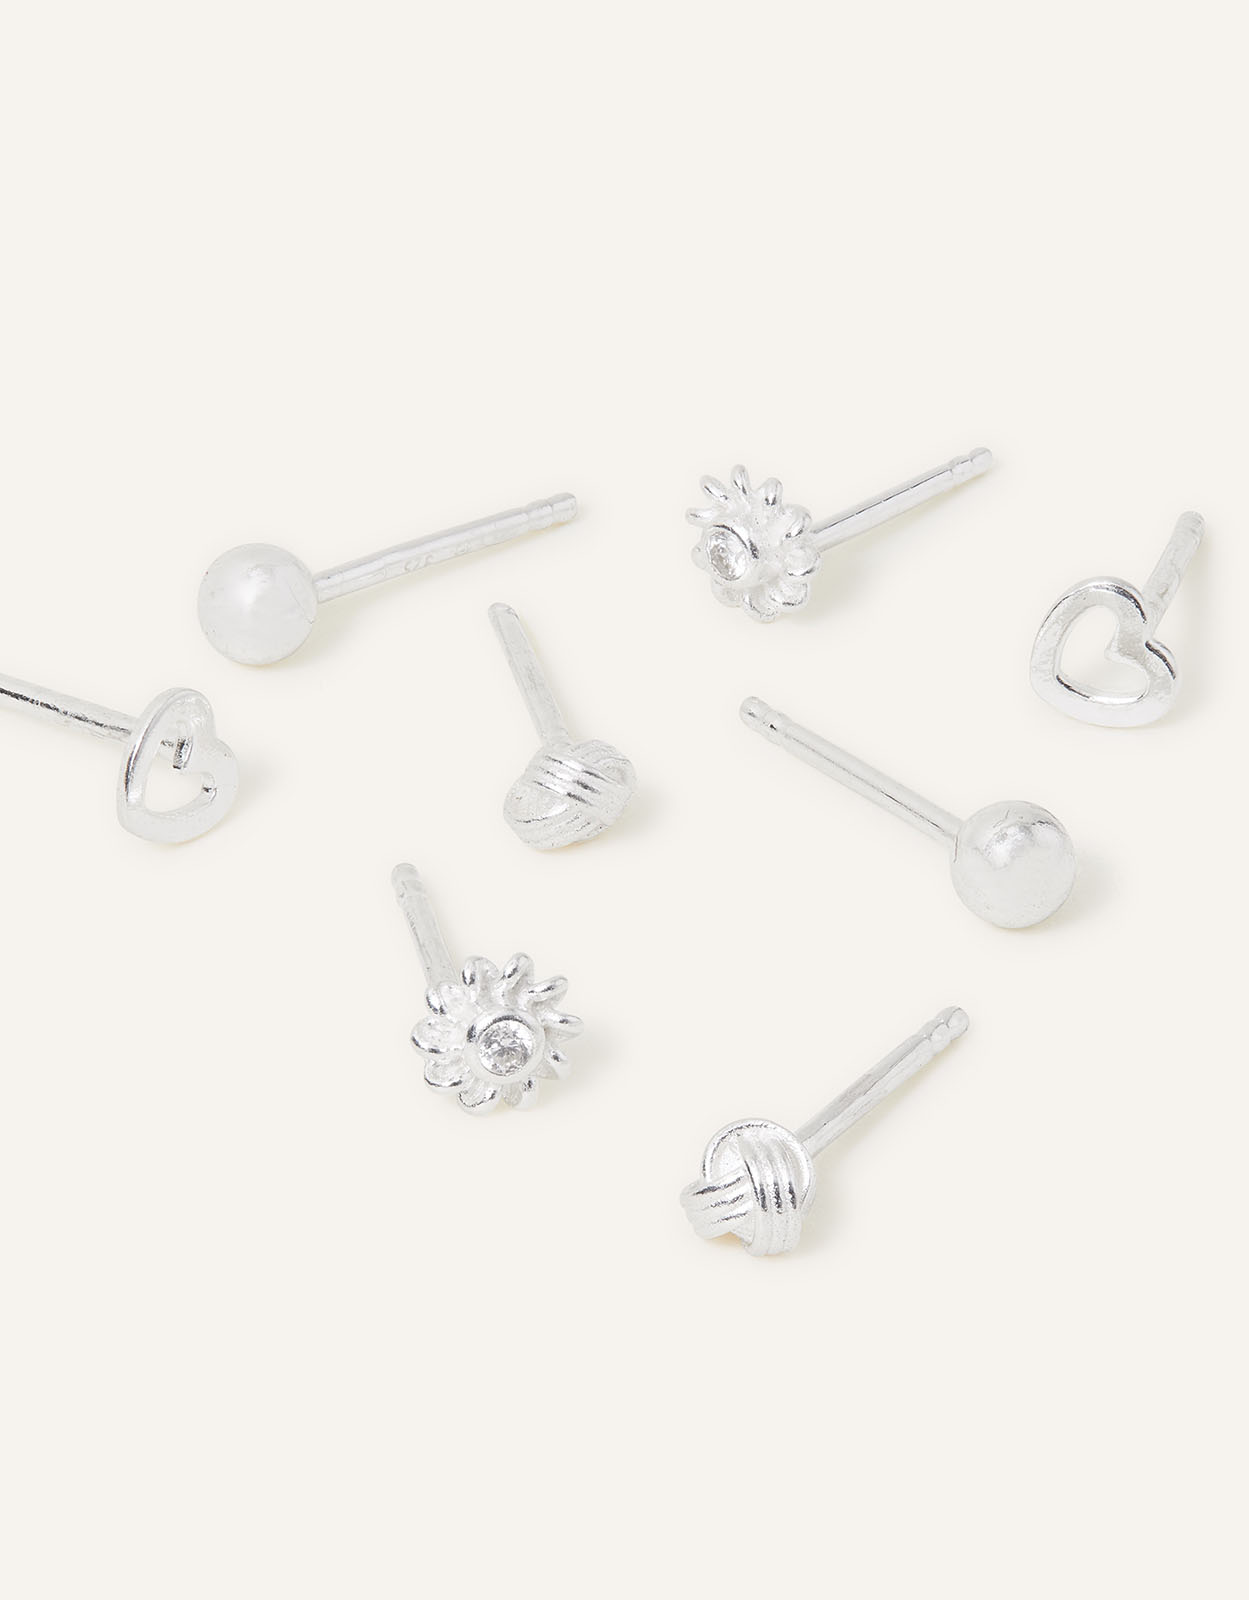 Accessorize Women's Sterling Silver Pack of 4 Mixed Studs, Size: 0.5cm